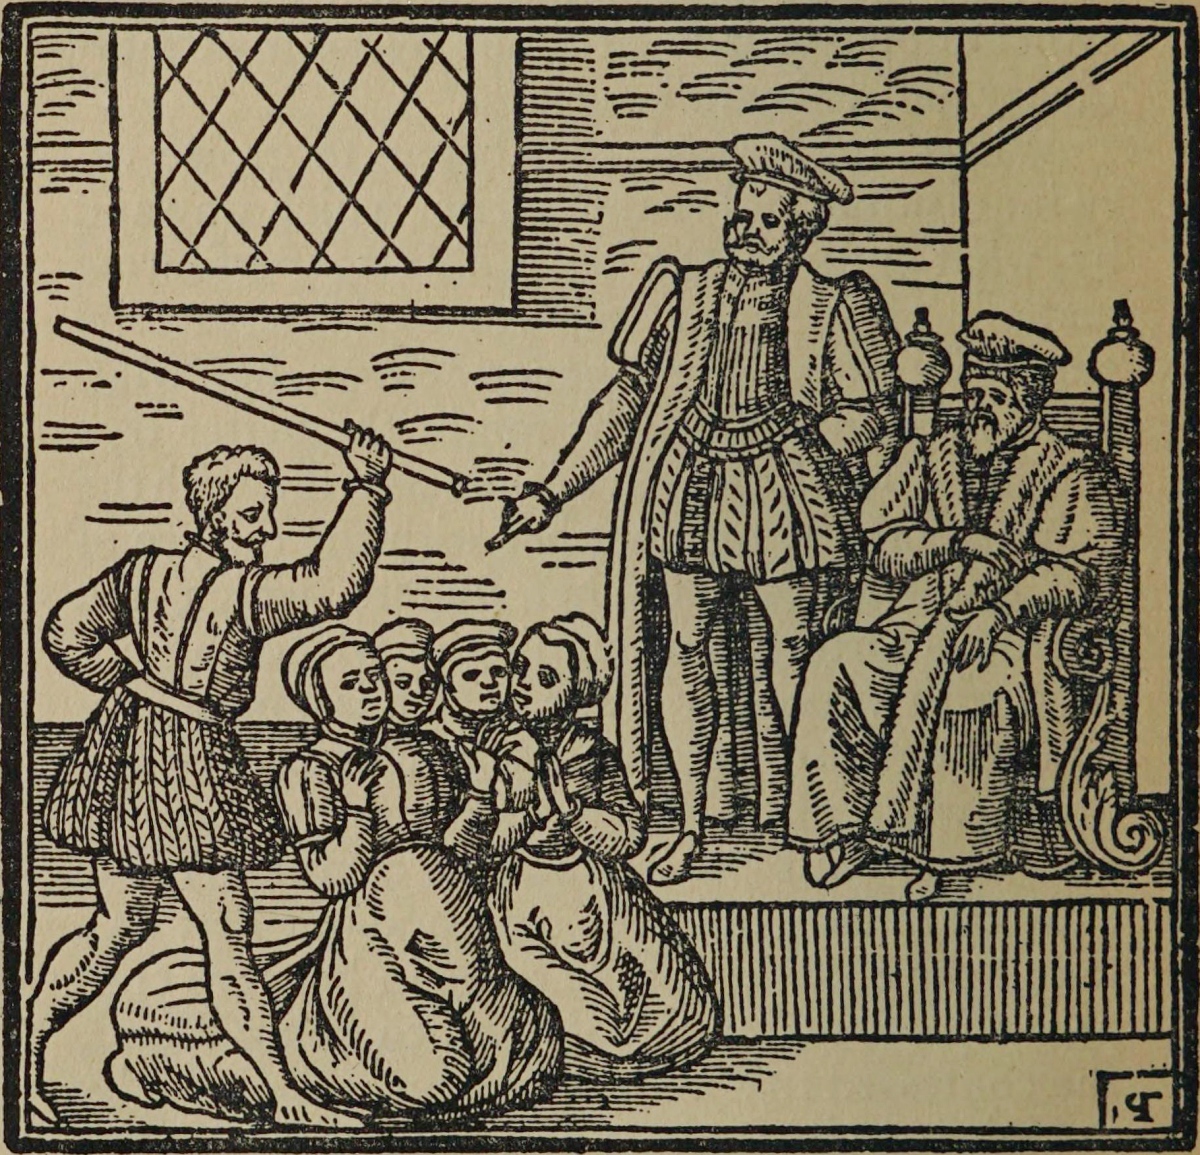 North Berwick witch trial engraving